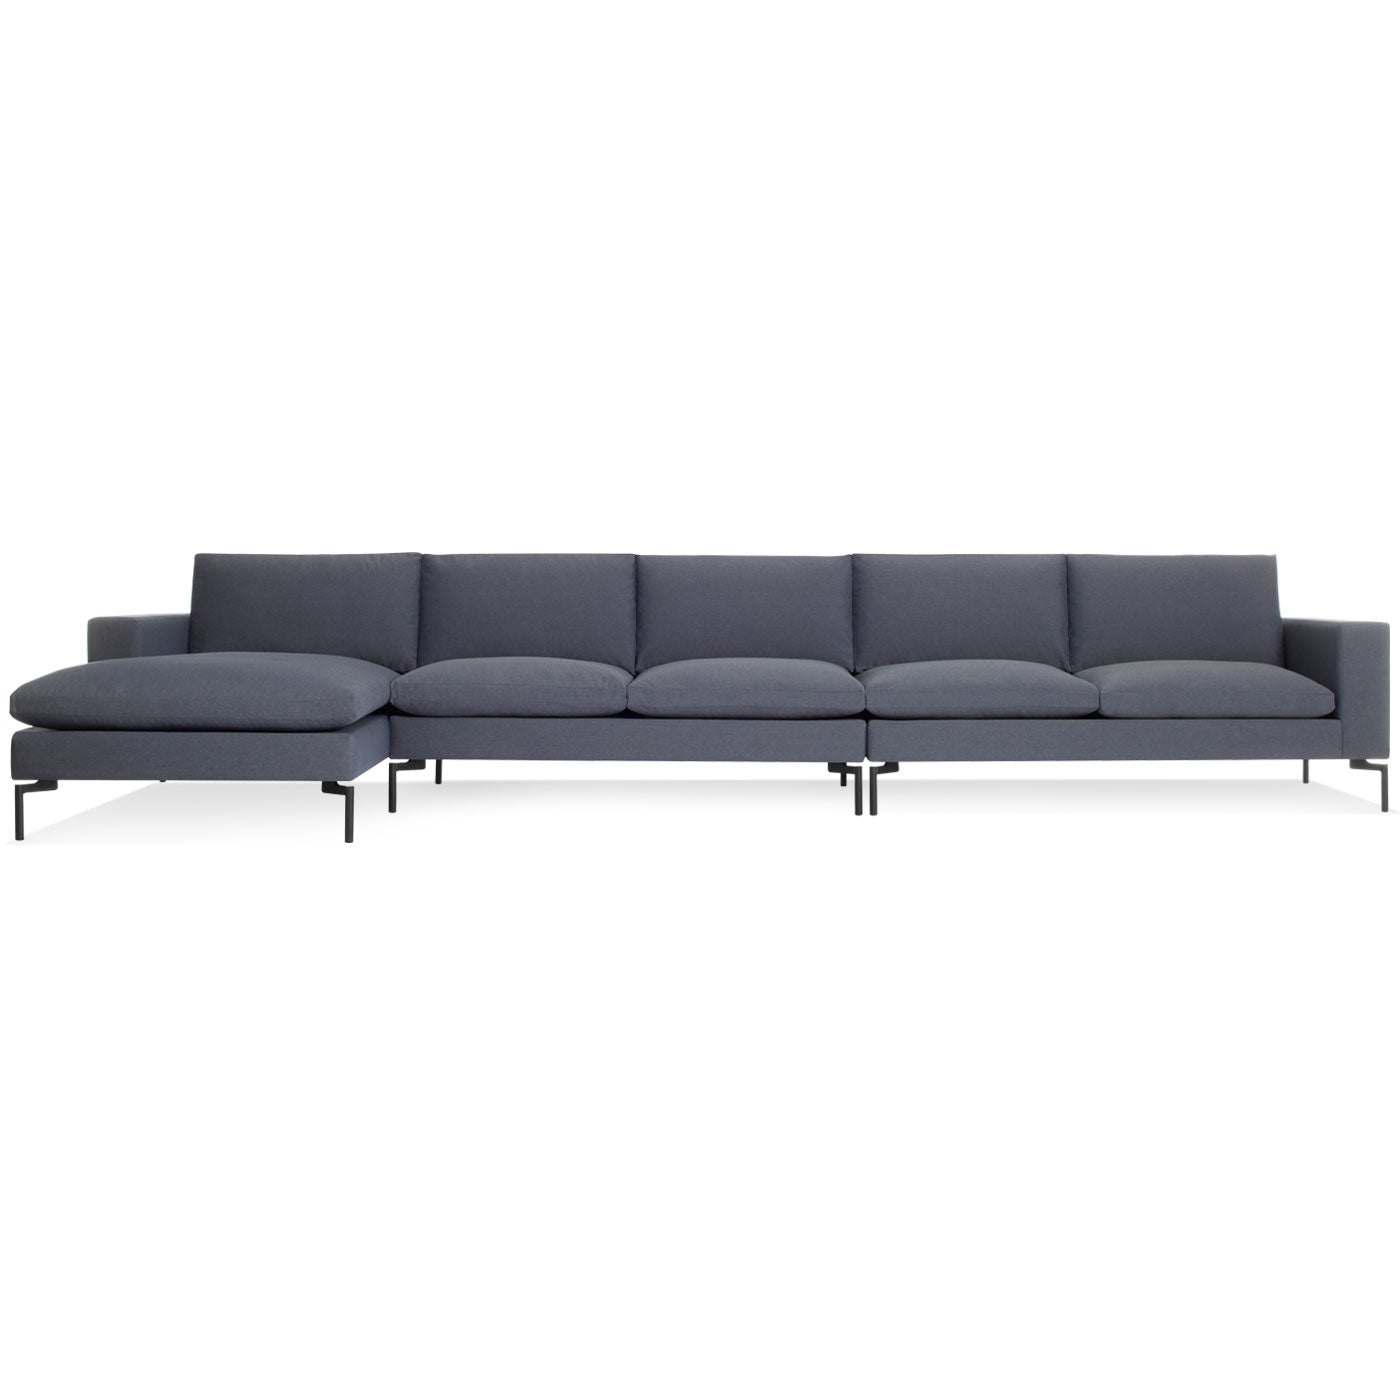 New Standard 165" Sofa Sectional